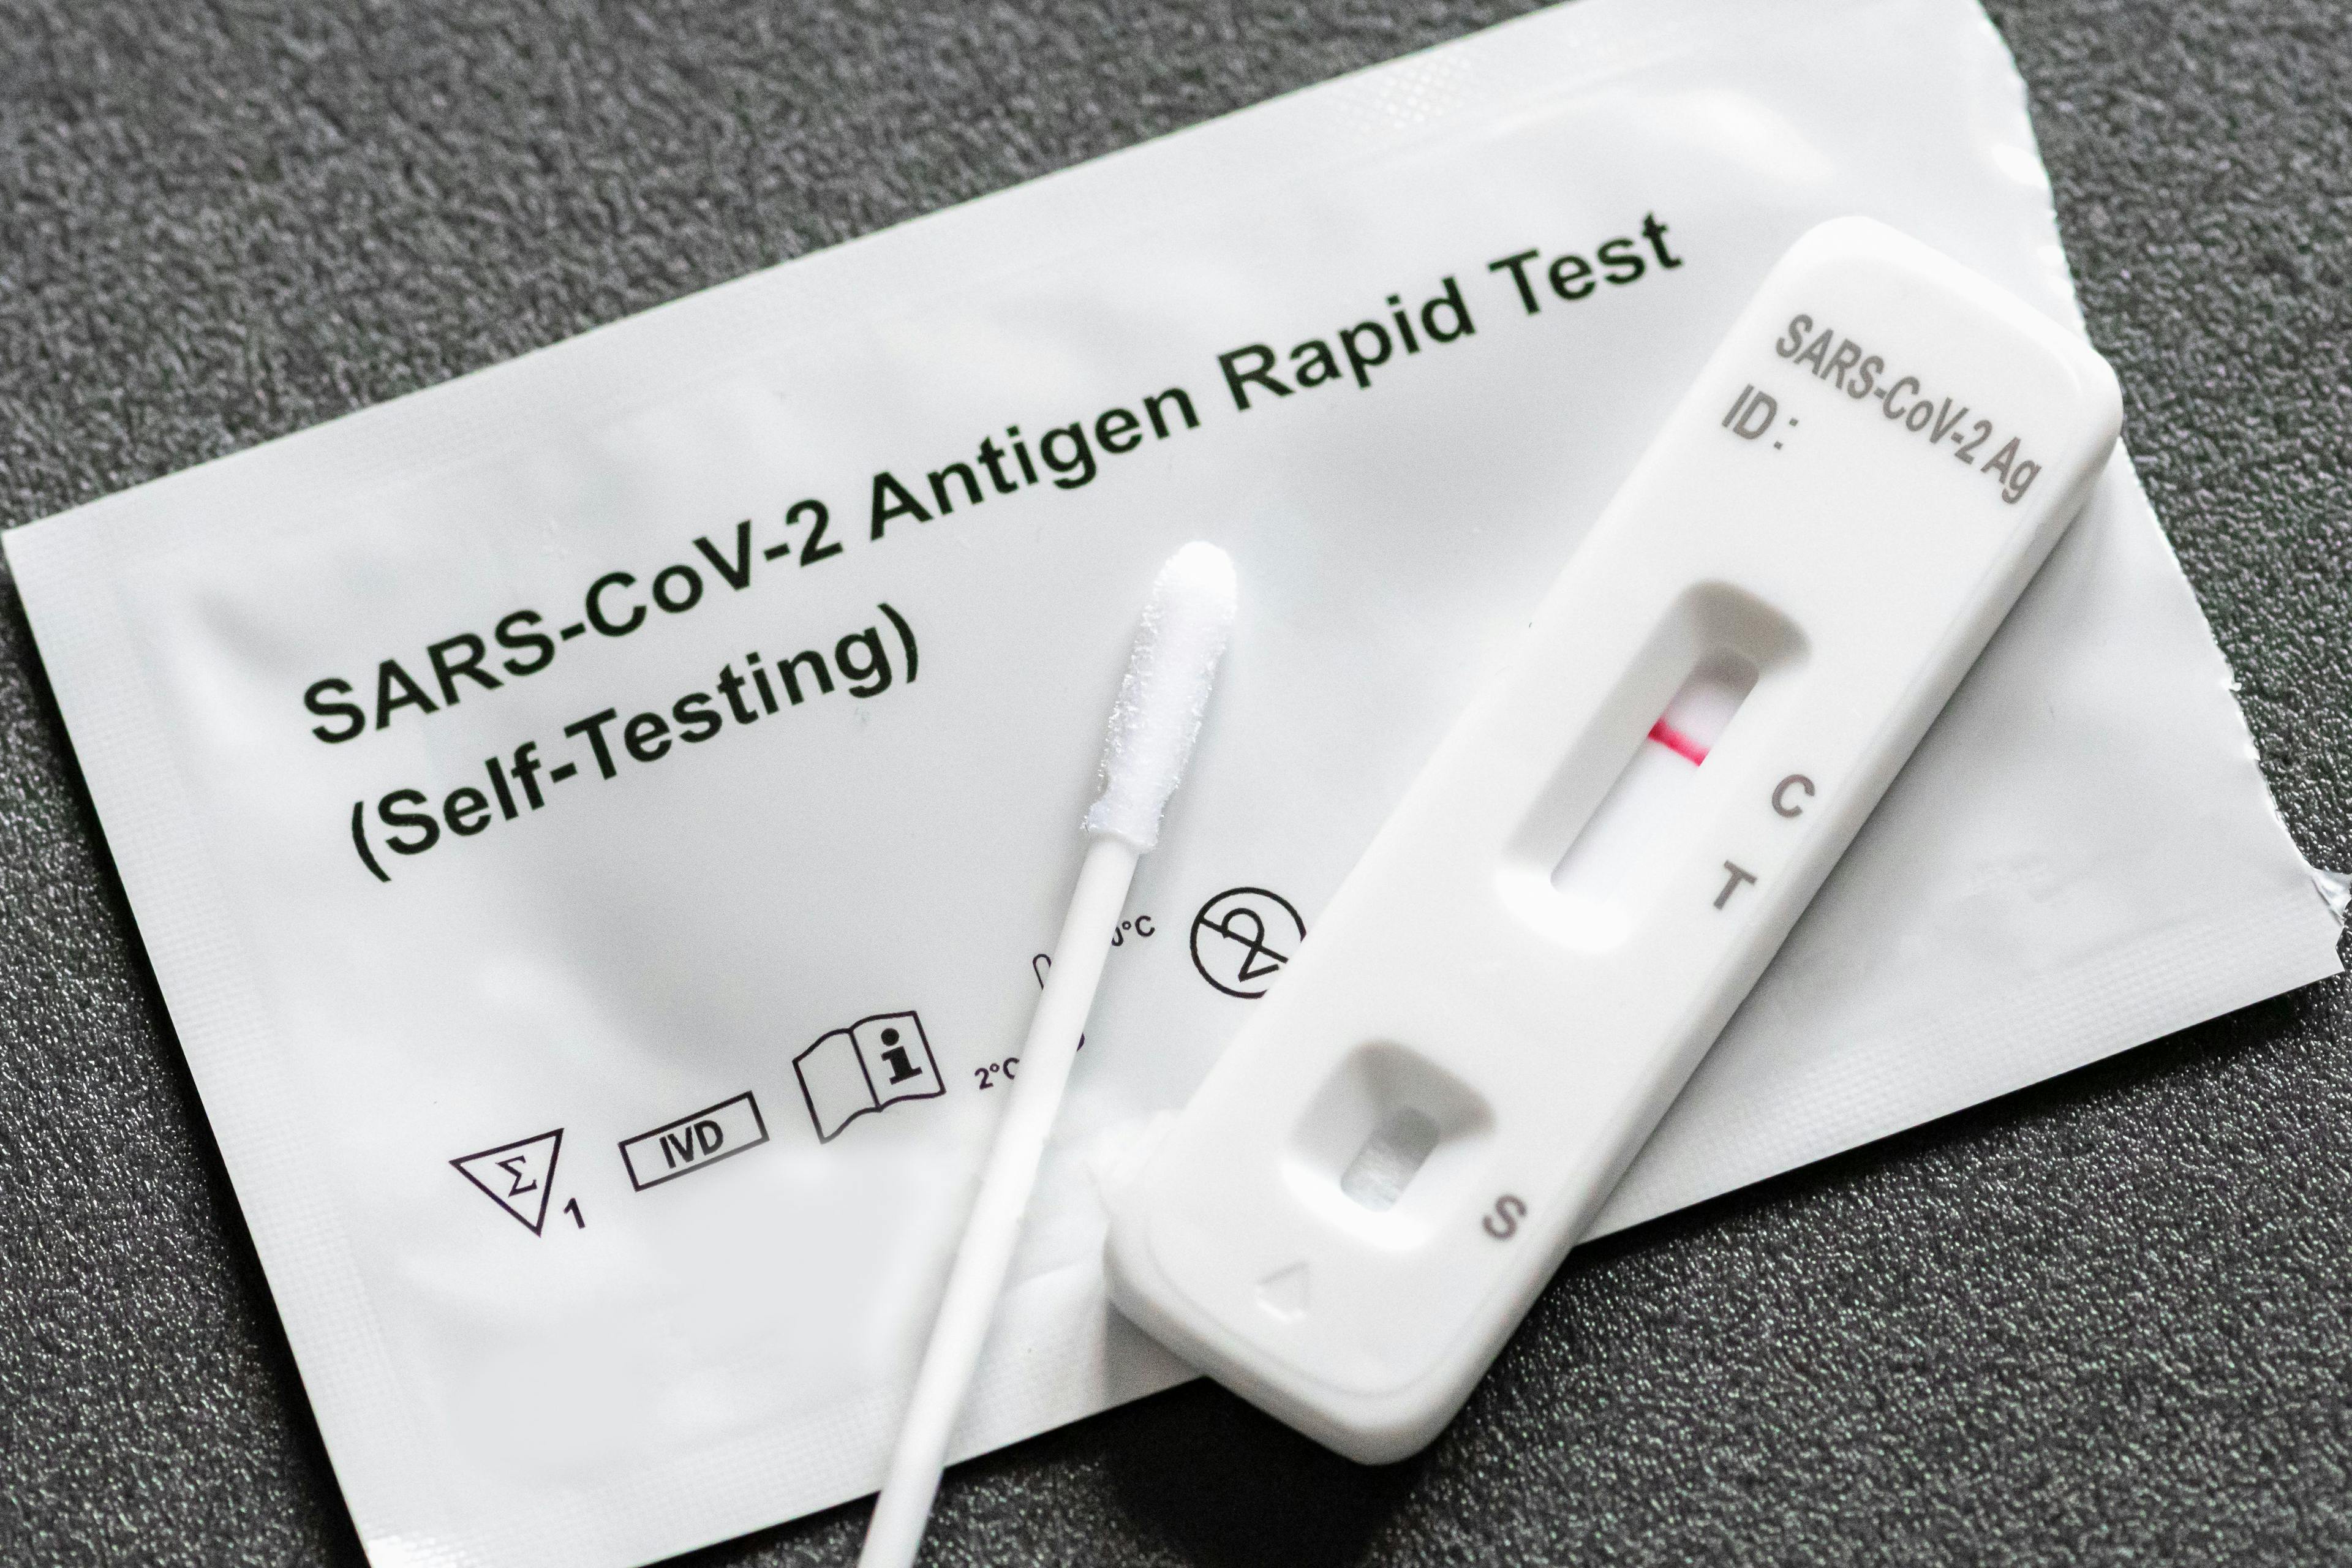 Study shows children can self-swab for COVID-19 test